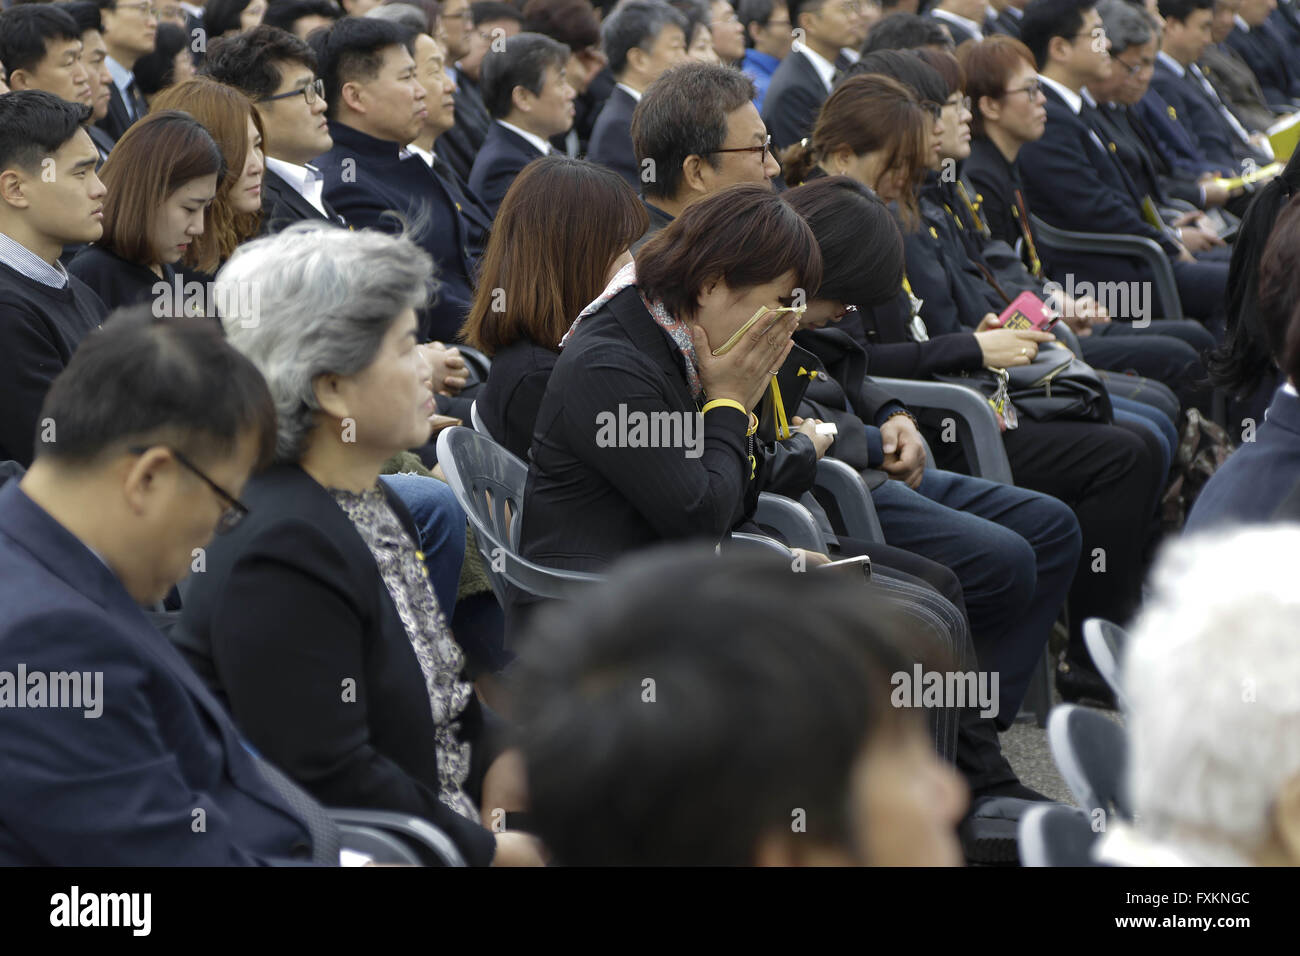 Ansan, Gyeonggi, South Korea. 16th Apr, 2016. A visitor and relative of a victim of the sunken ferry Sewol commemorate during a ceremony for the second anniversary of the sinking at a memorial altar in Ansan, South Korea. Thousands of South Koreans on Saturday participated in memorial events nationwide for the more than 300 people who died in a ferry disaster two years ago that deeply rattled the country. About 2,500 people, including grieving family members and victims, gathered for an event marking the second anniversary of the sinking at a memorial altar in Ansan, where most of the victi Stock Photo